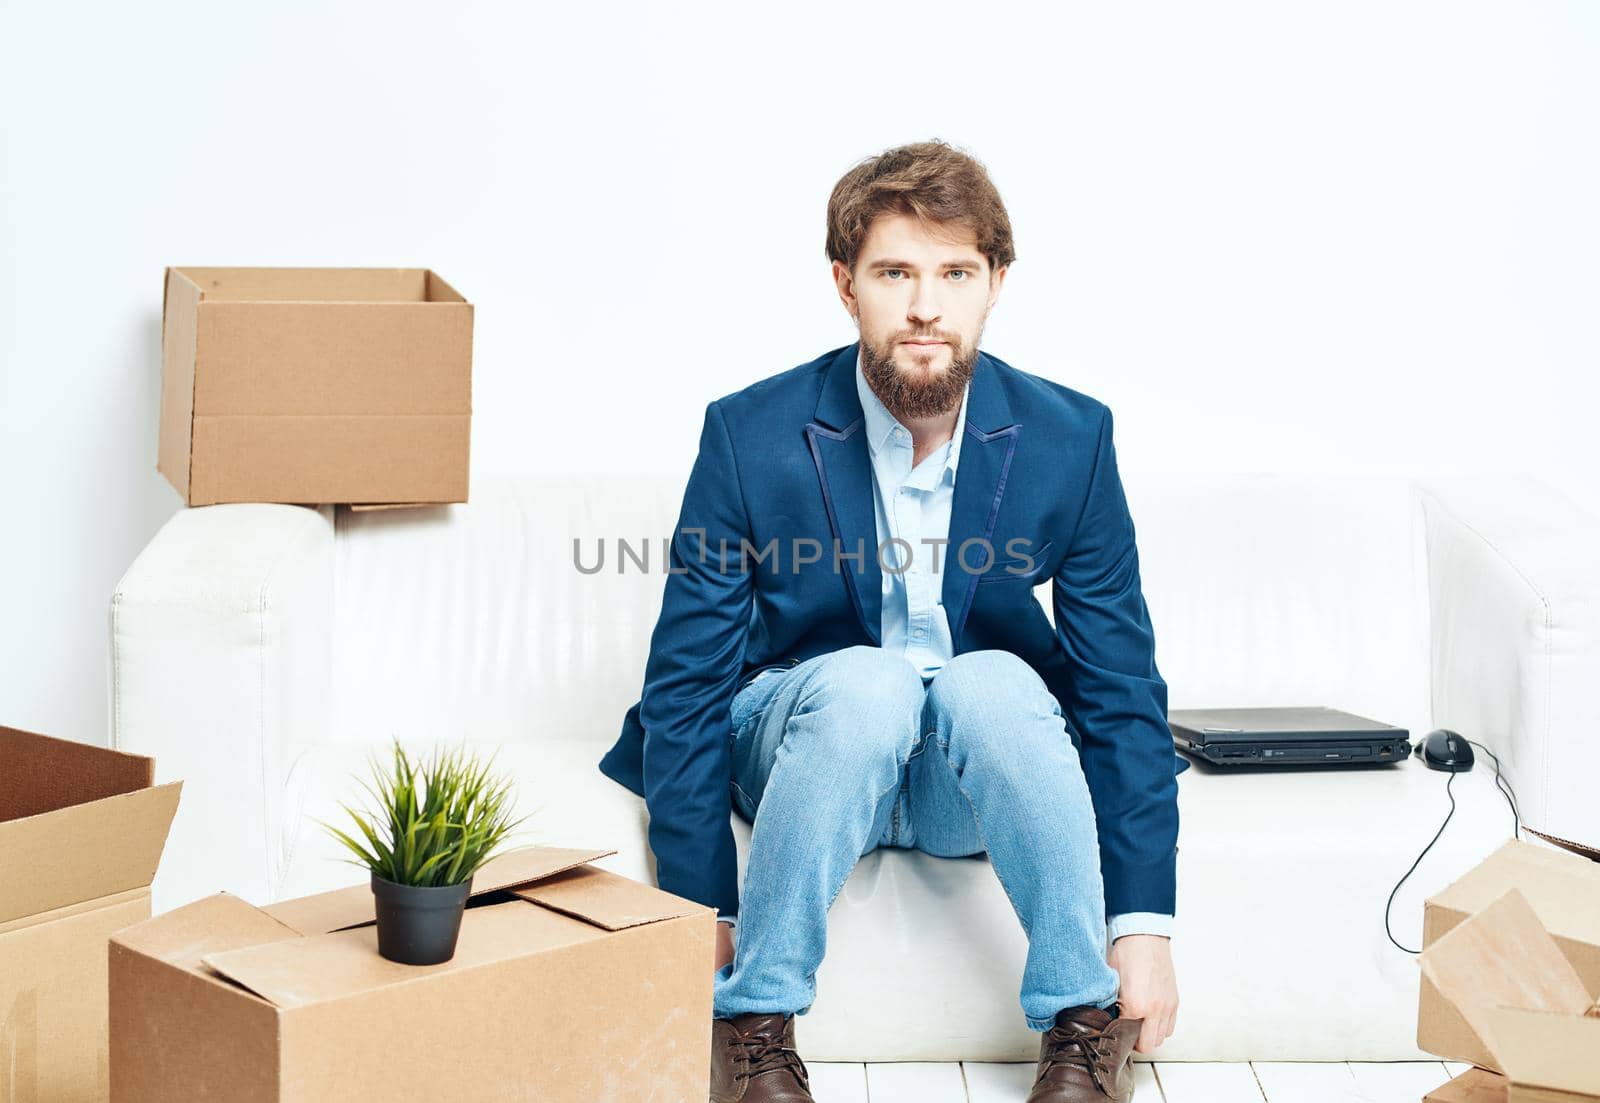 A man sits on the couch next to boxes unpacking a new moving location. High quality photo